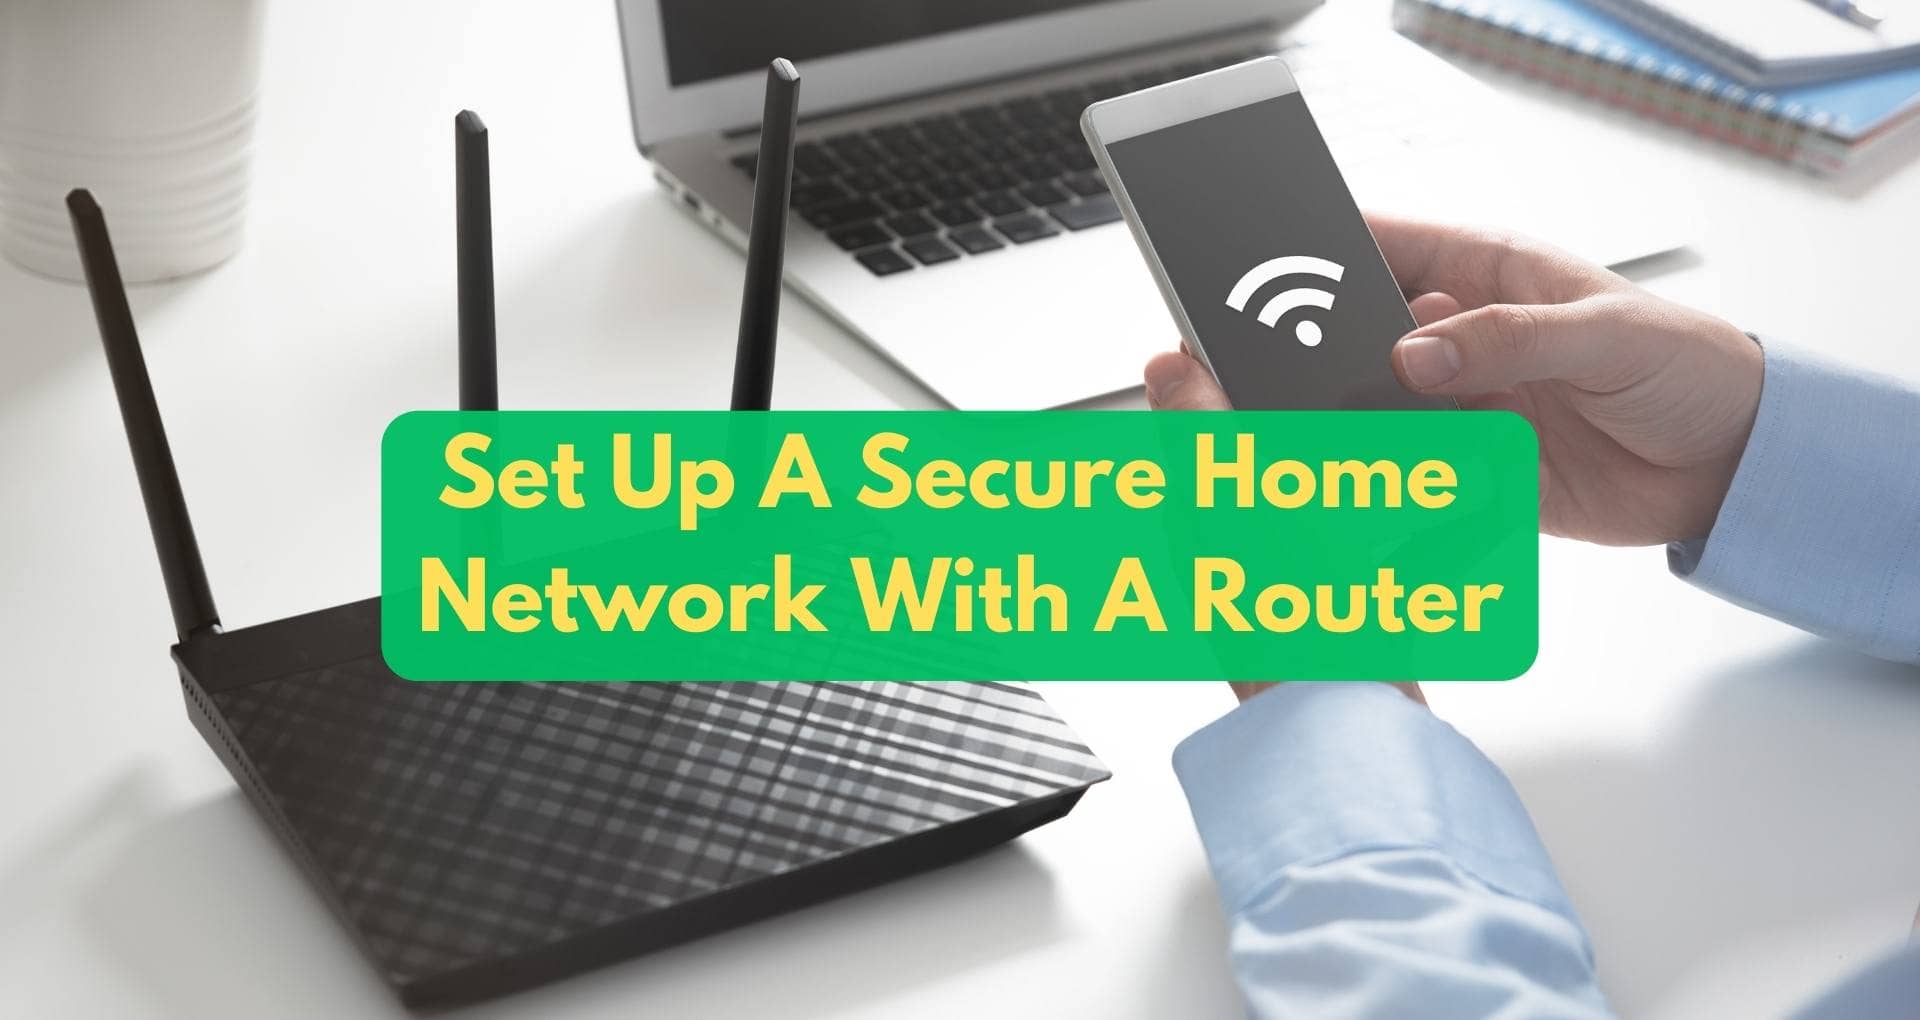 What Are The Steps To Set Up A Secure Home Network With A Router?